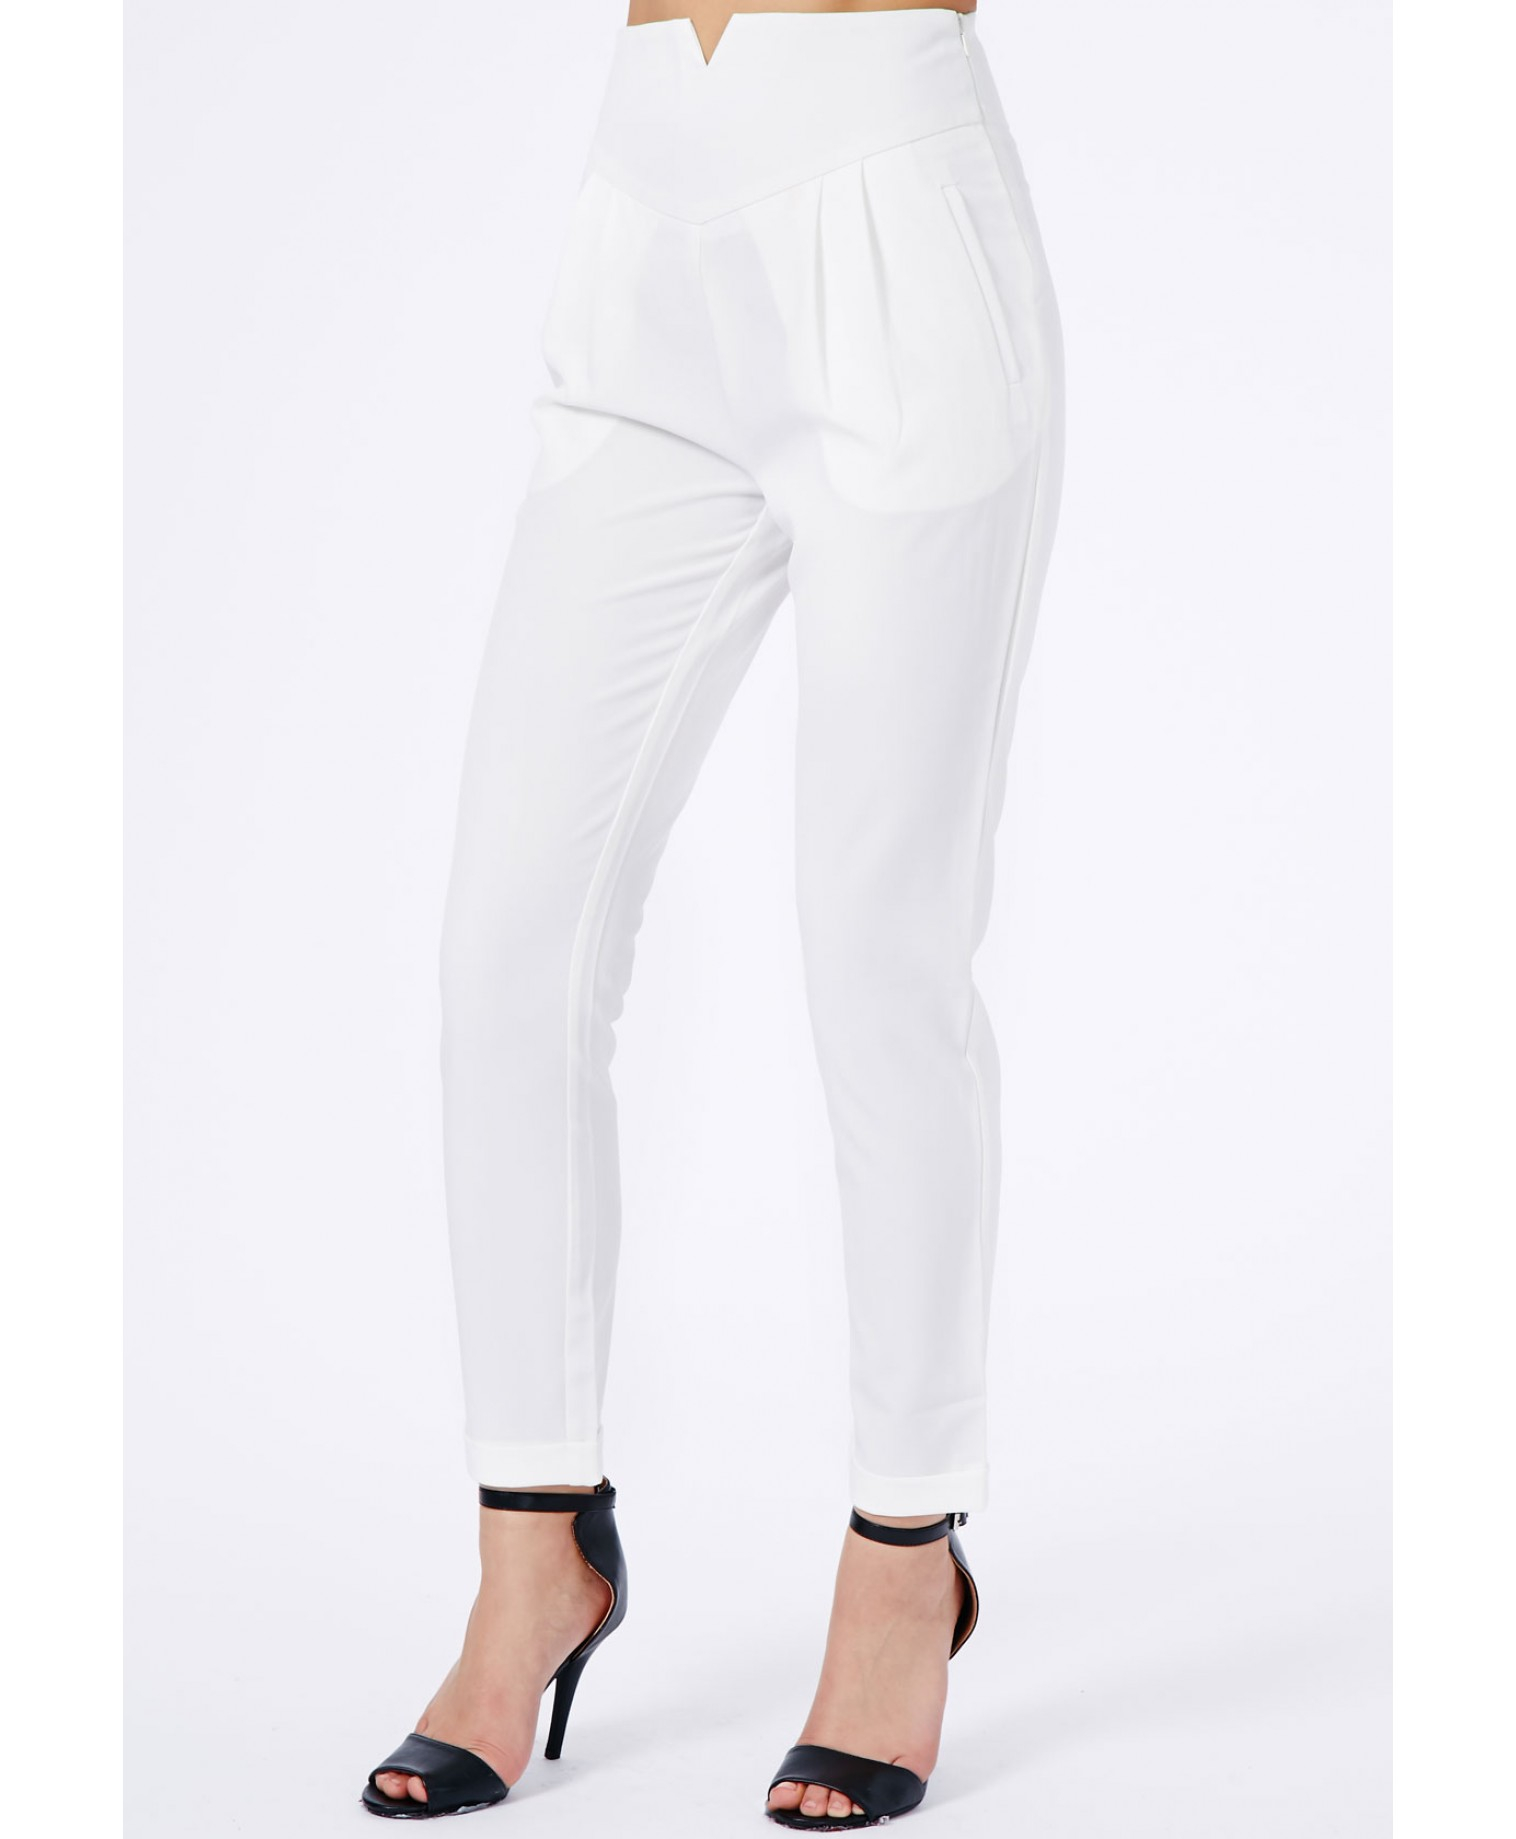 Lyst - Missguided Marilyn Cigarette Trousers In Cream in White